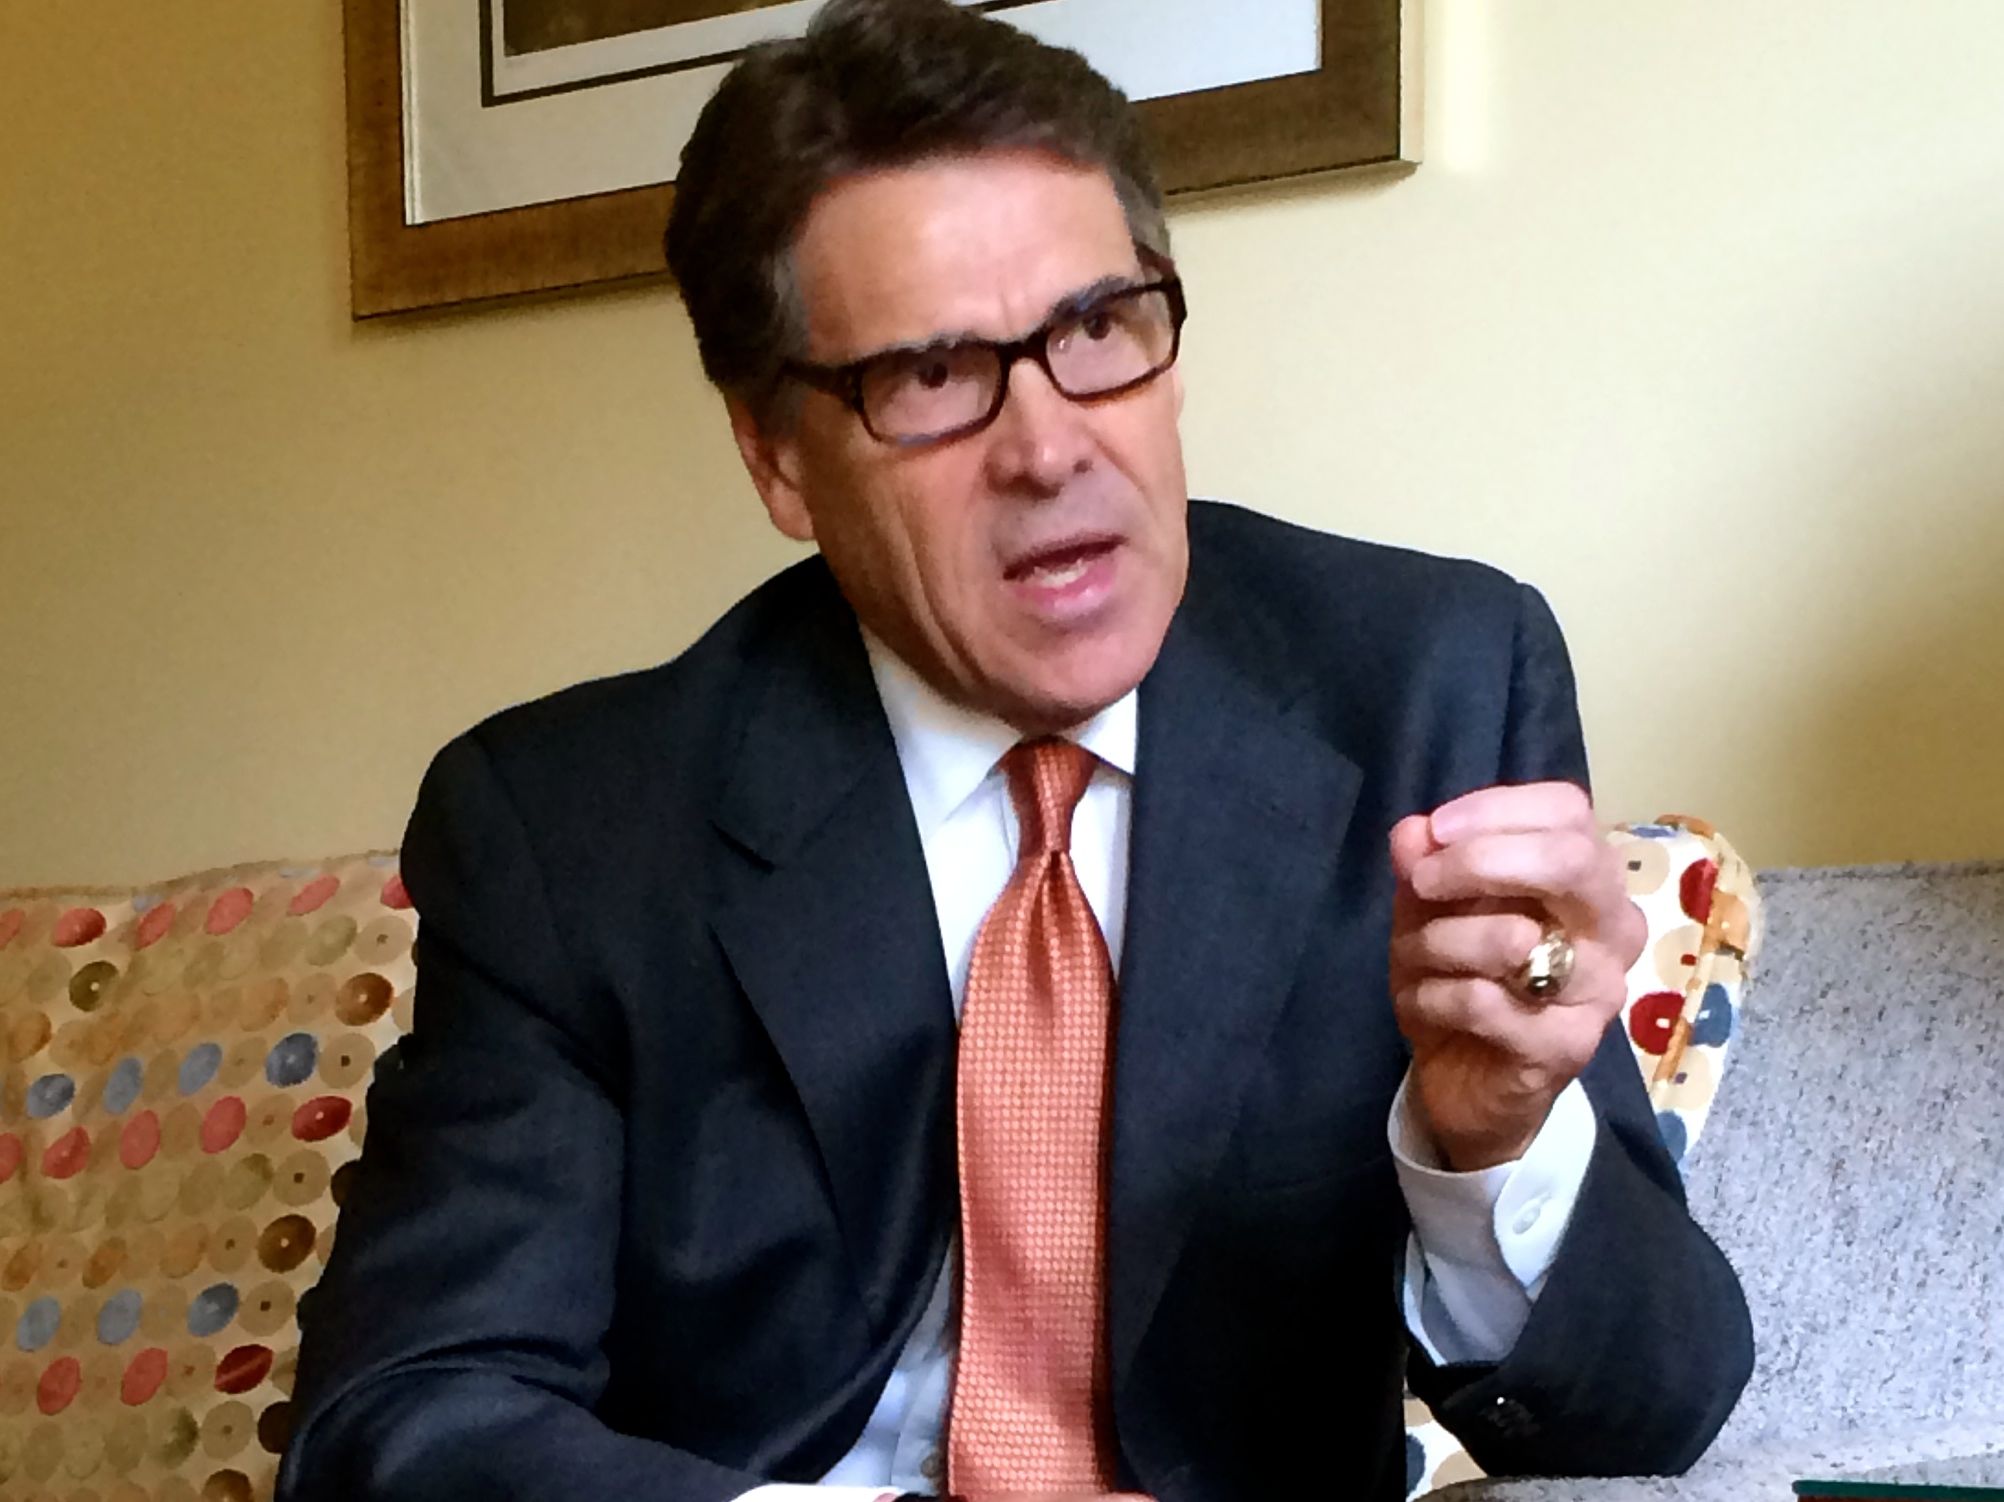 Rick Perry Makes Announcement About National Guard at Border